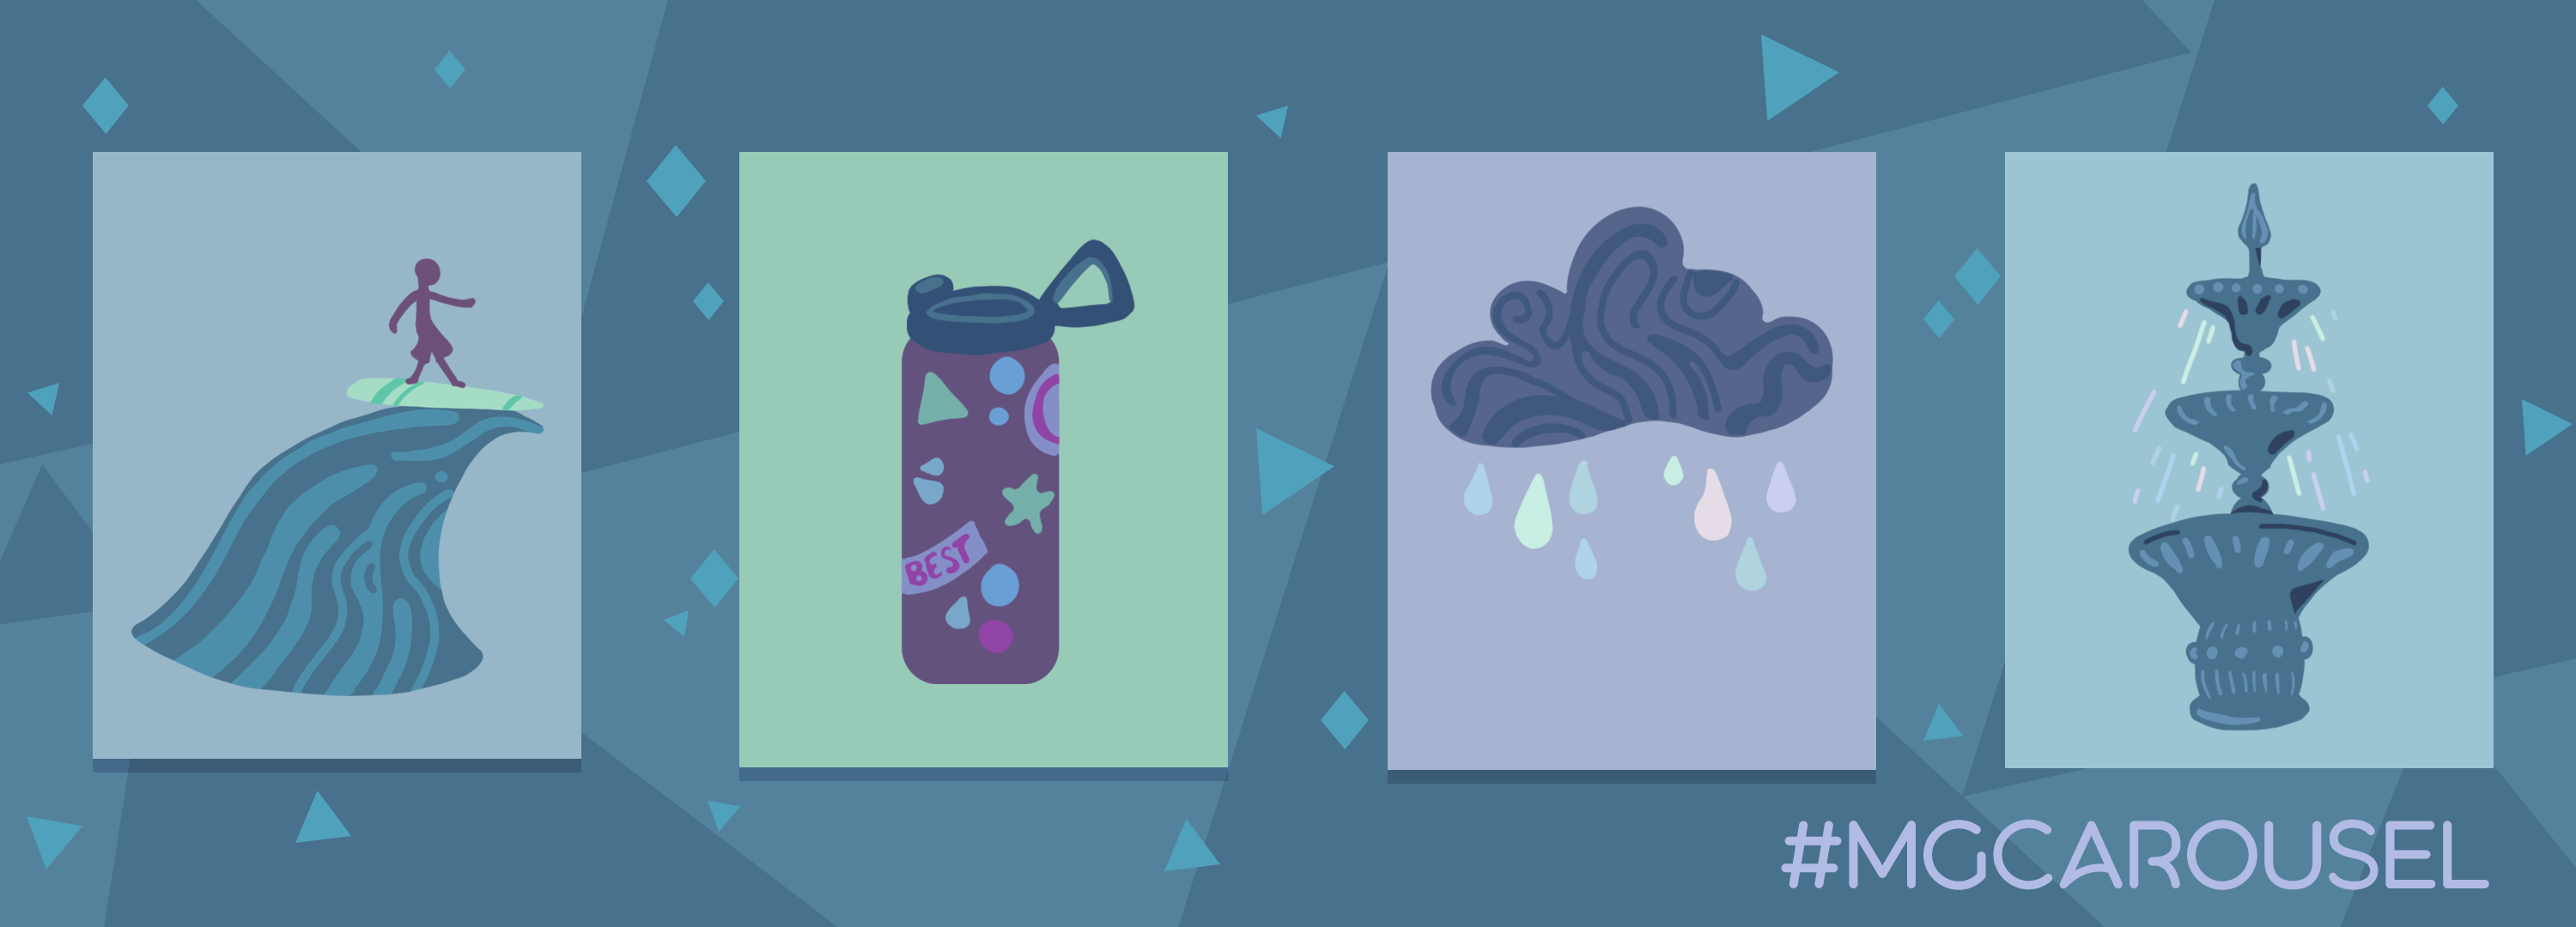 Bookmark for July 2022 features water-themed illustrations, including a surfer on a wave, a reusable water bottle, a raining storm cloud, and a decorative water fountain.